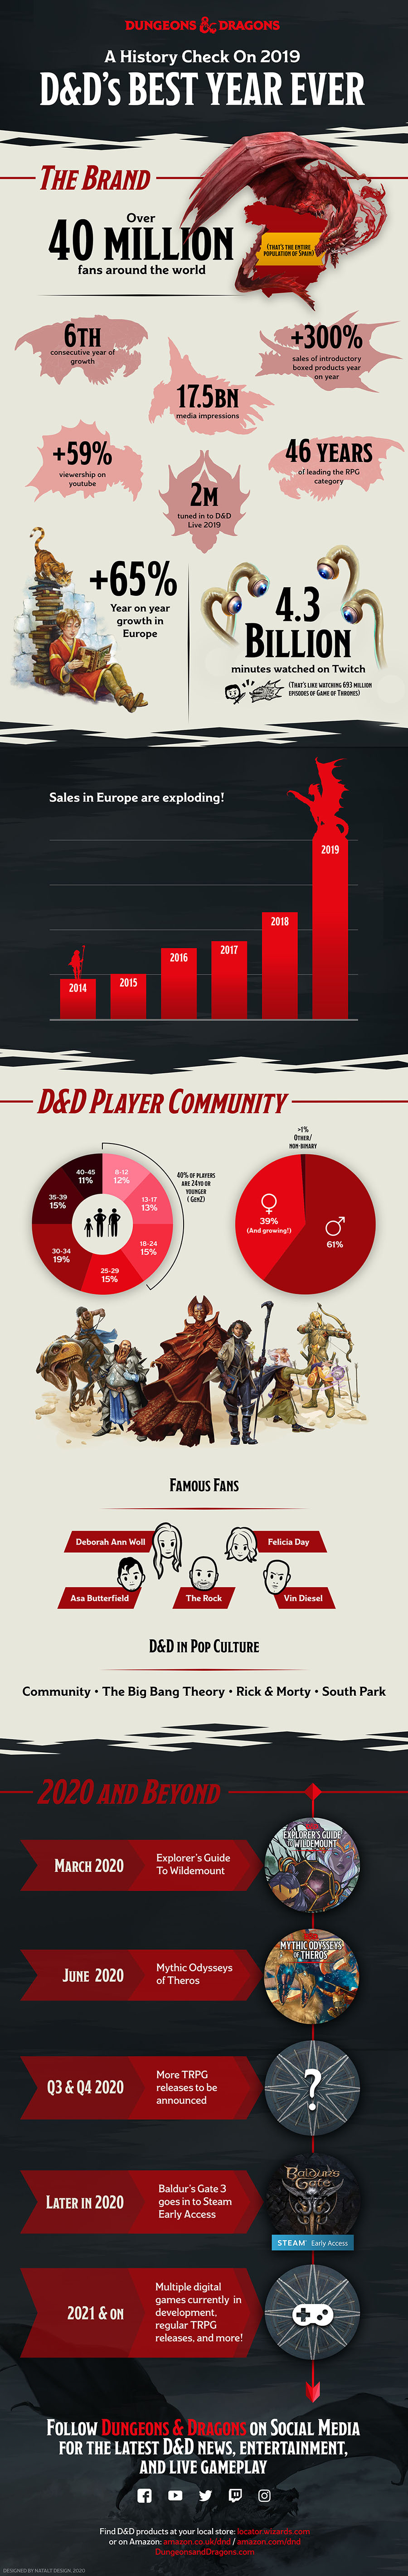  Dungeons & Dragons Infografica 2019